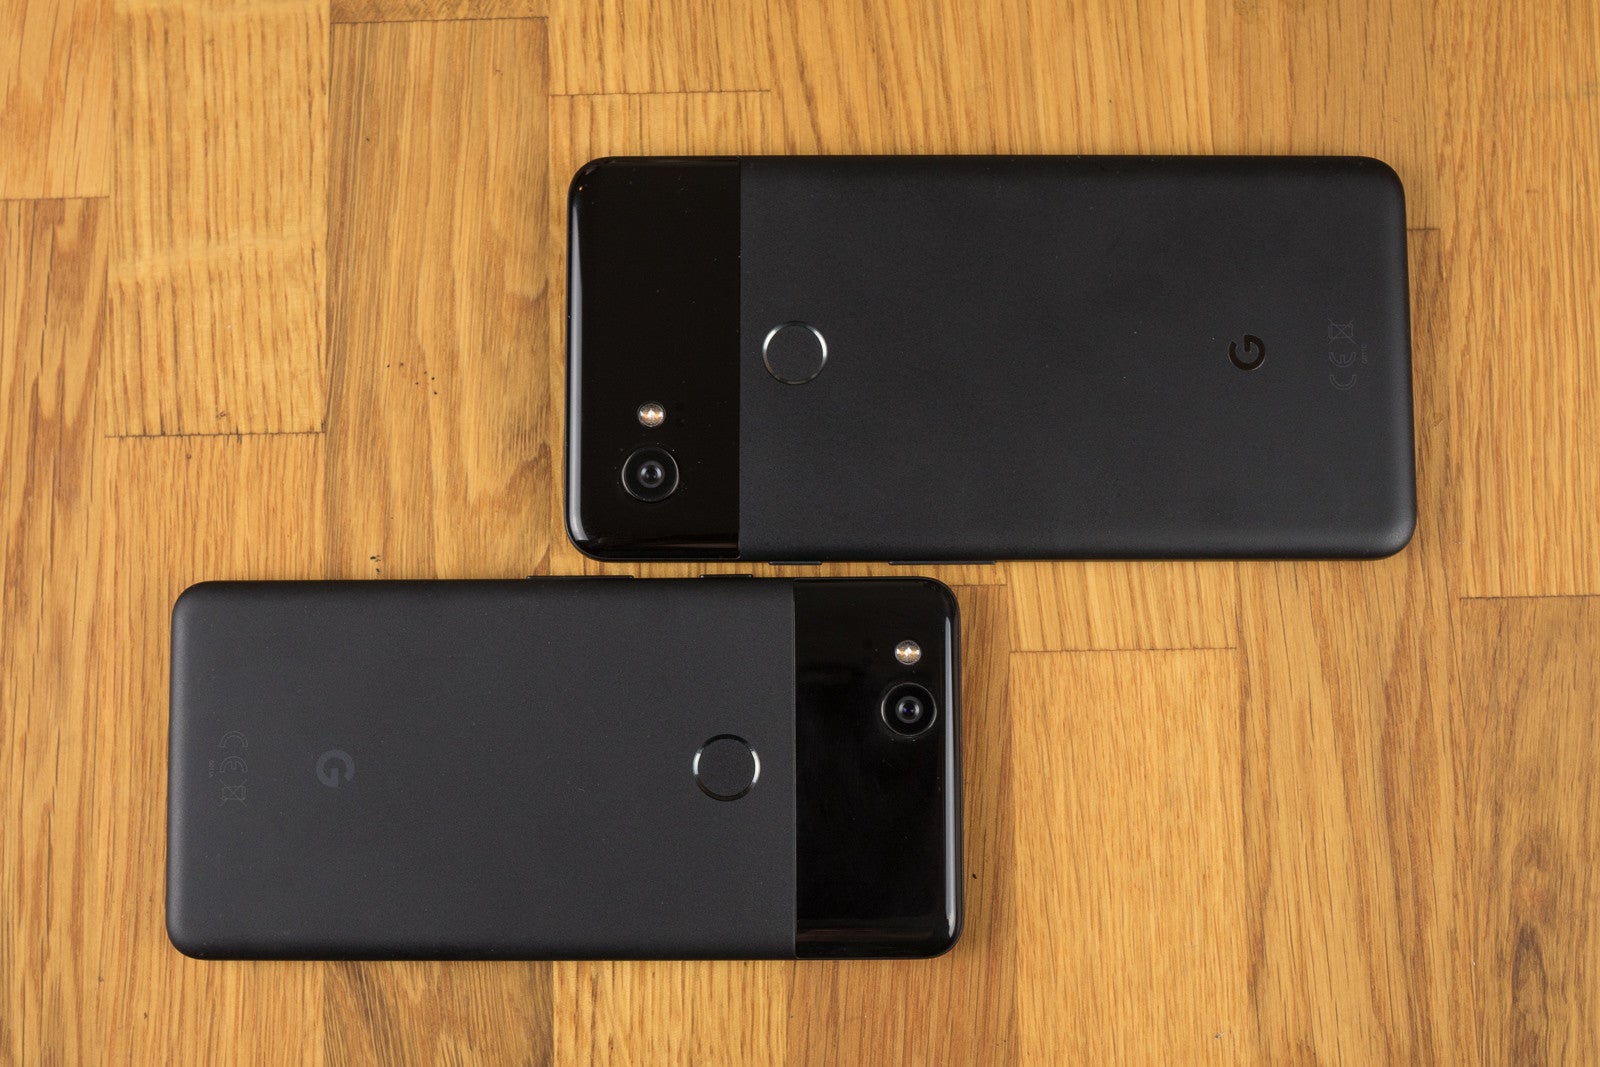 Google has found a way to fix Pixel 2 and Pixel 2 XL random reboots, but you'll have to wait